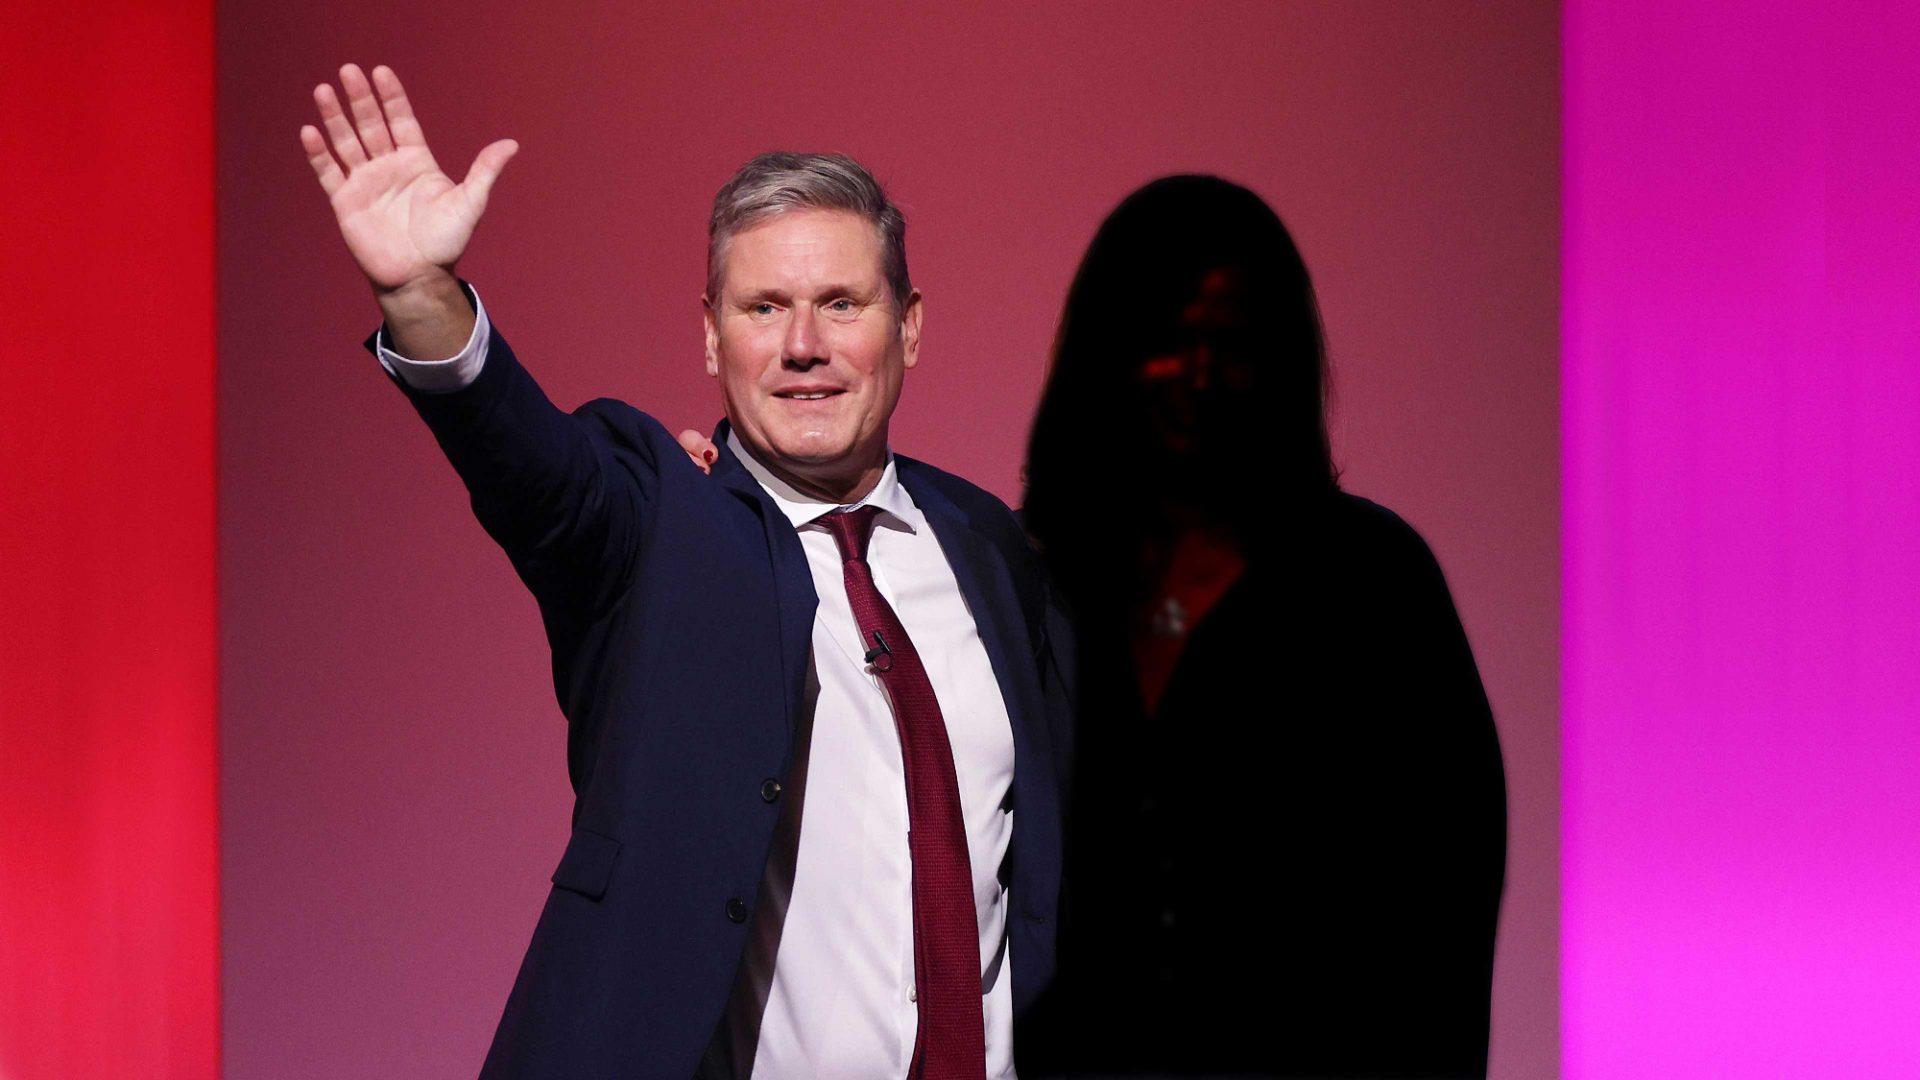 Victoria Starmer has proved frustratingly elusive for Britain’s press in the run-up to the election. Photo: Dan Kitwood/Getty/TNE